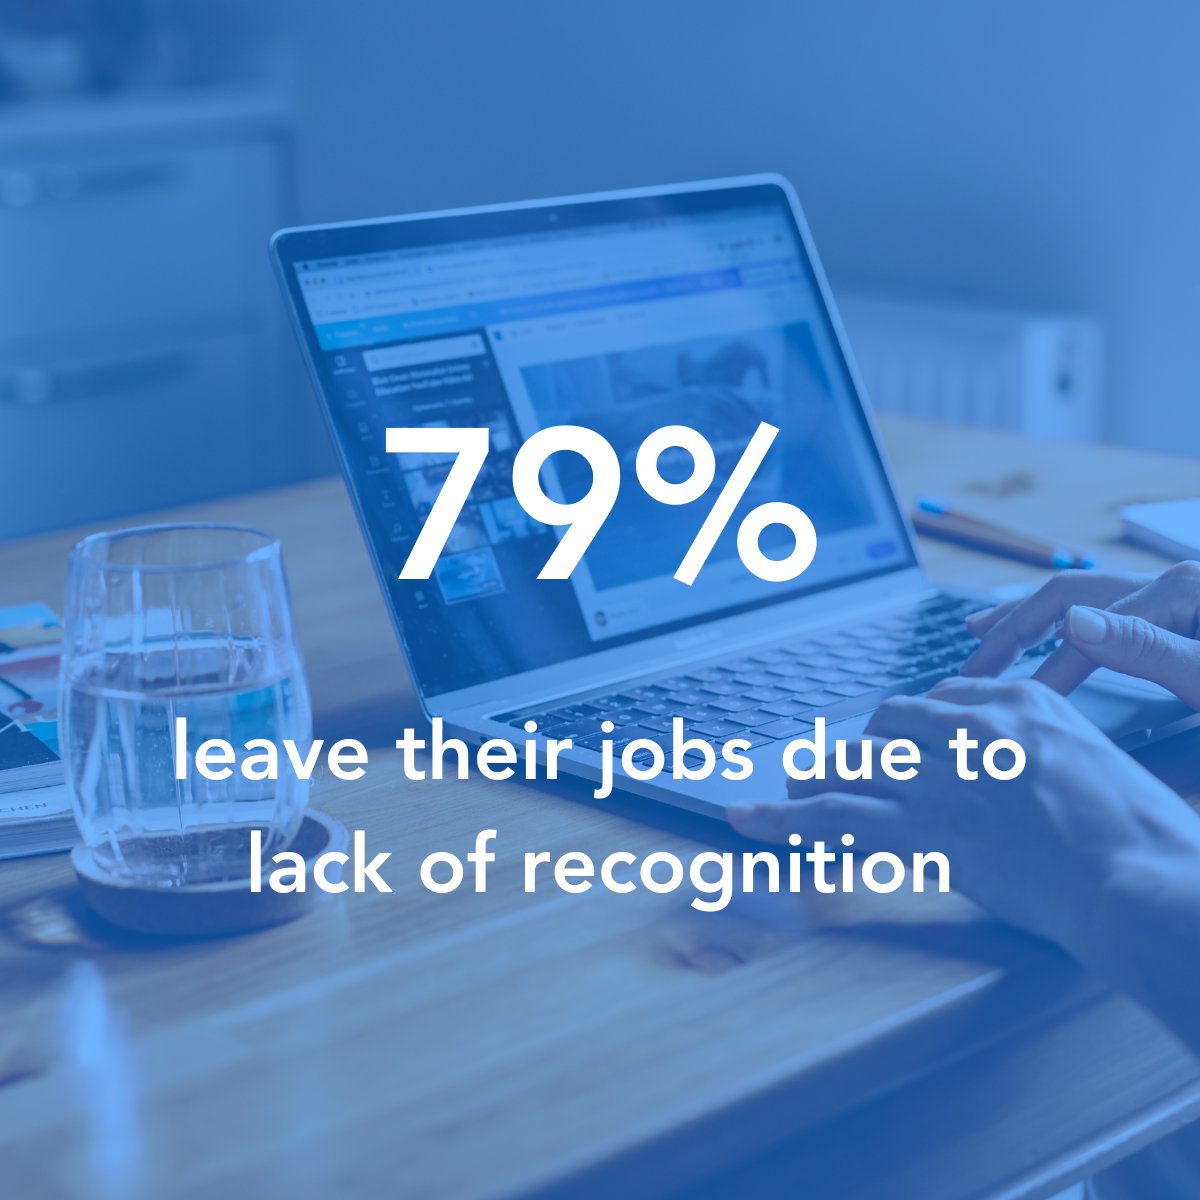 Did you know that a staggering 79% of individuals leave a job due to lack of recognition?

MS Teams apps help keep your employees engaged & retained, find out more: hubs.li/Q02dRs5m0

#MSteams #CustomMSTeamsApp #MSTEAMS #MSTeamsIntegration